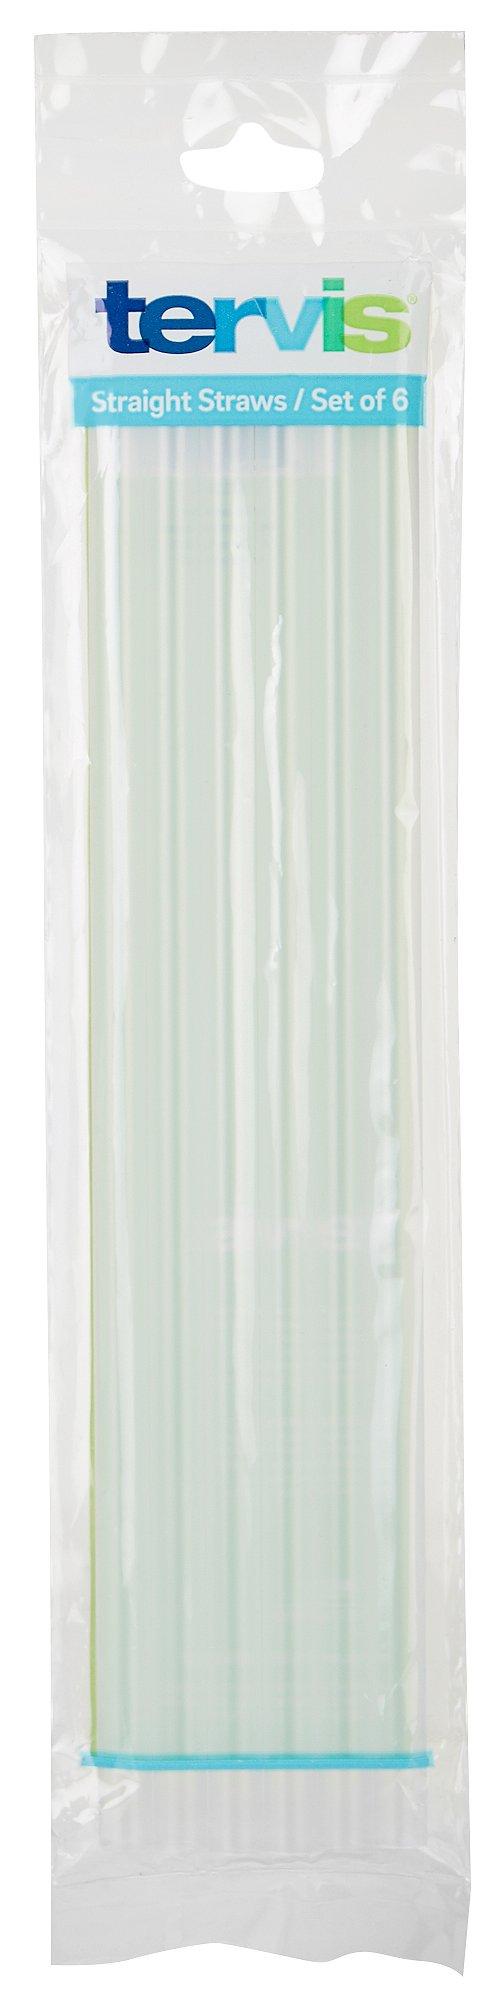 6-pk. Frosted 10 Inch Straight Straws